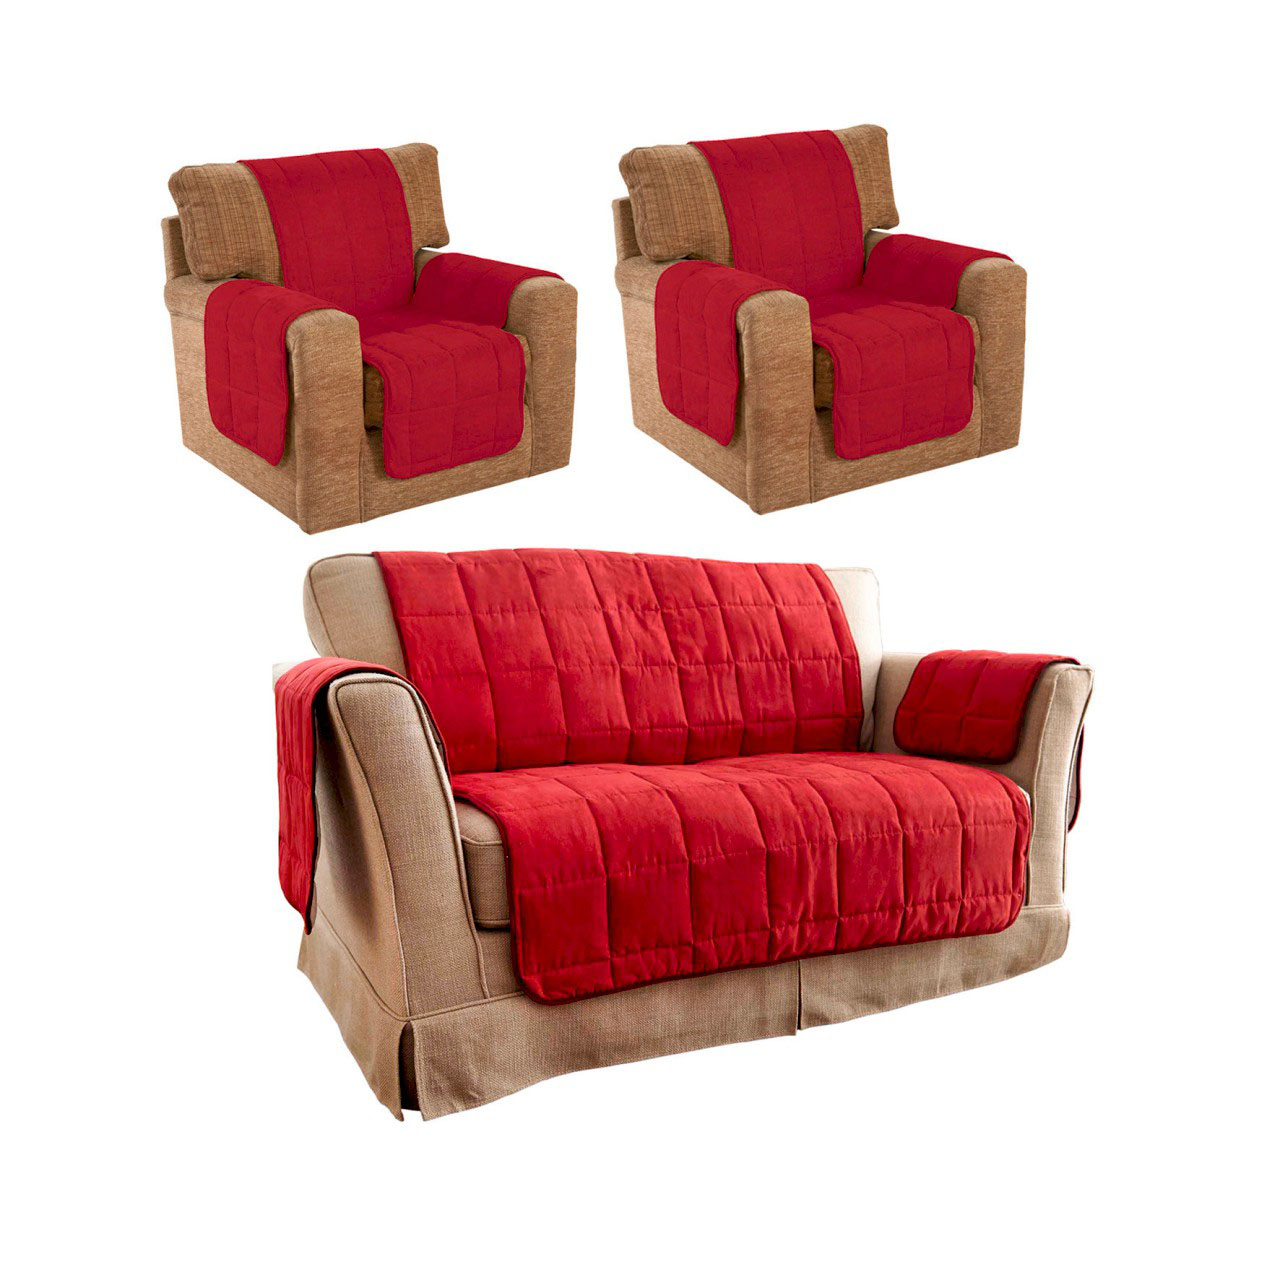 Faux Suede Quilted Furniture Covers - 2-seater Set